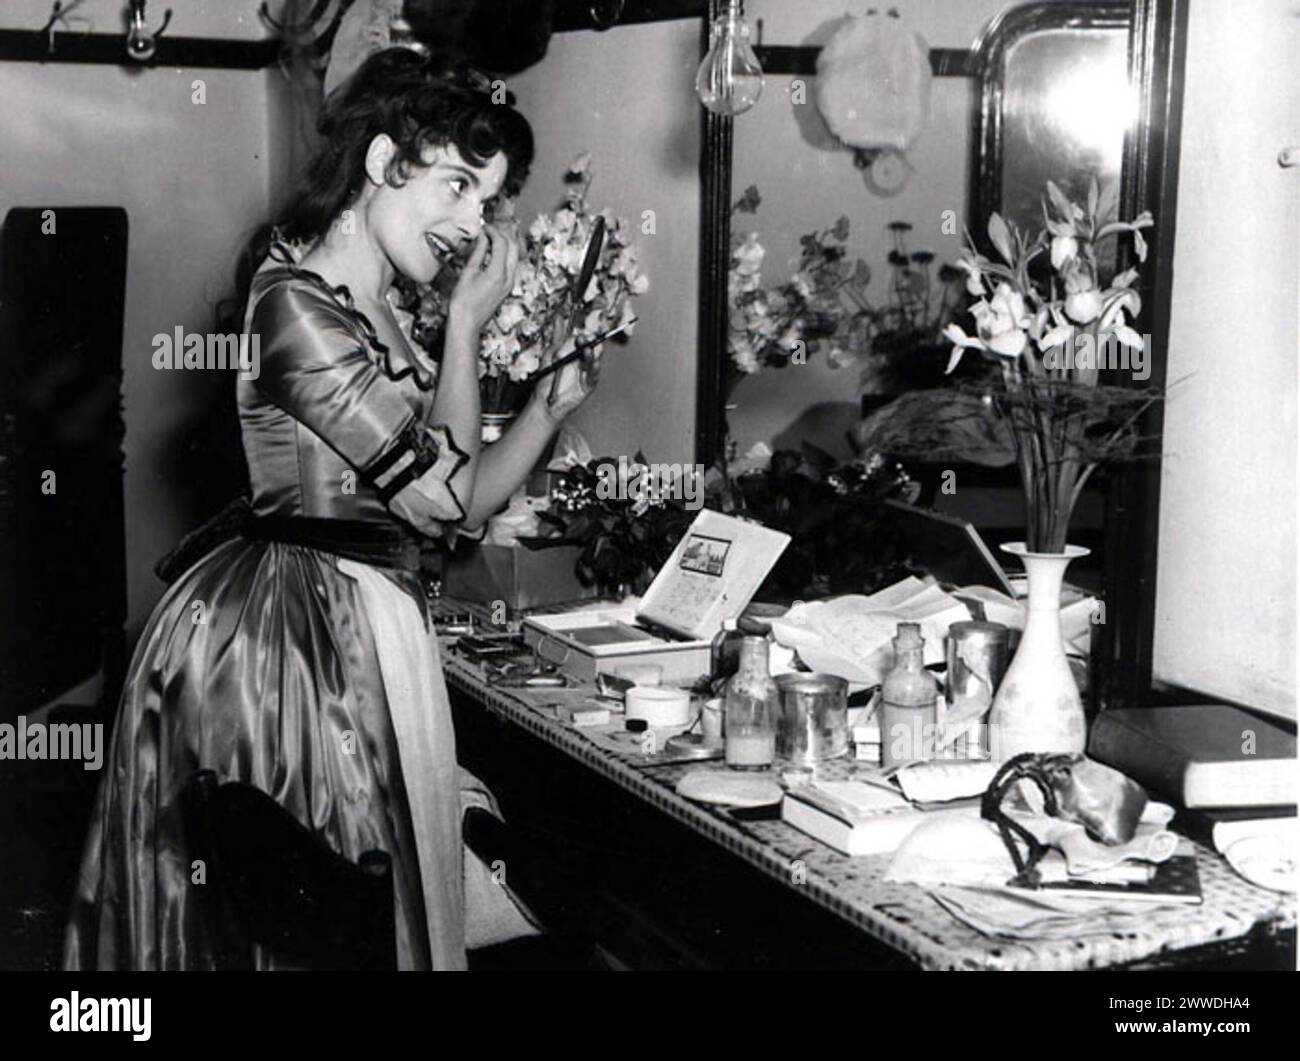 No business like it Description: Yvonne Mitchell in her dressing room at the Theatre Royal, Bath. The actress was touring with a production from Bristol Old Vic. Date: 22nd February 1949 flowers, woman, smile, standing, mirror, costume, bath, theatre, makeup, 1940s, dressingroom, actress, gown, backstage, 1949, bristololdvic, oldvic, yvonnemitchell, theatricalia:production=87t Stock Photo